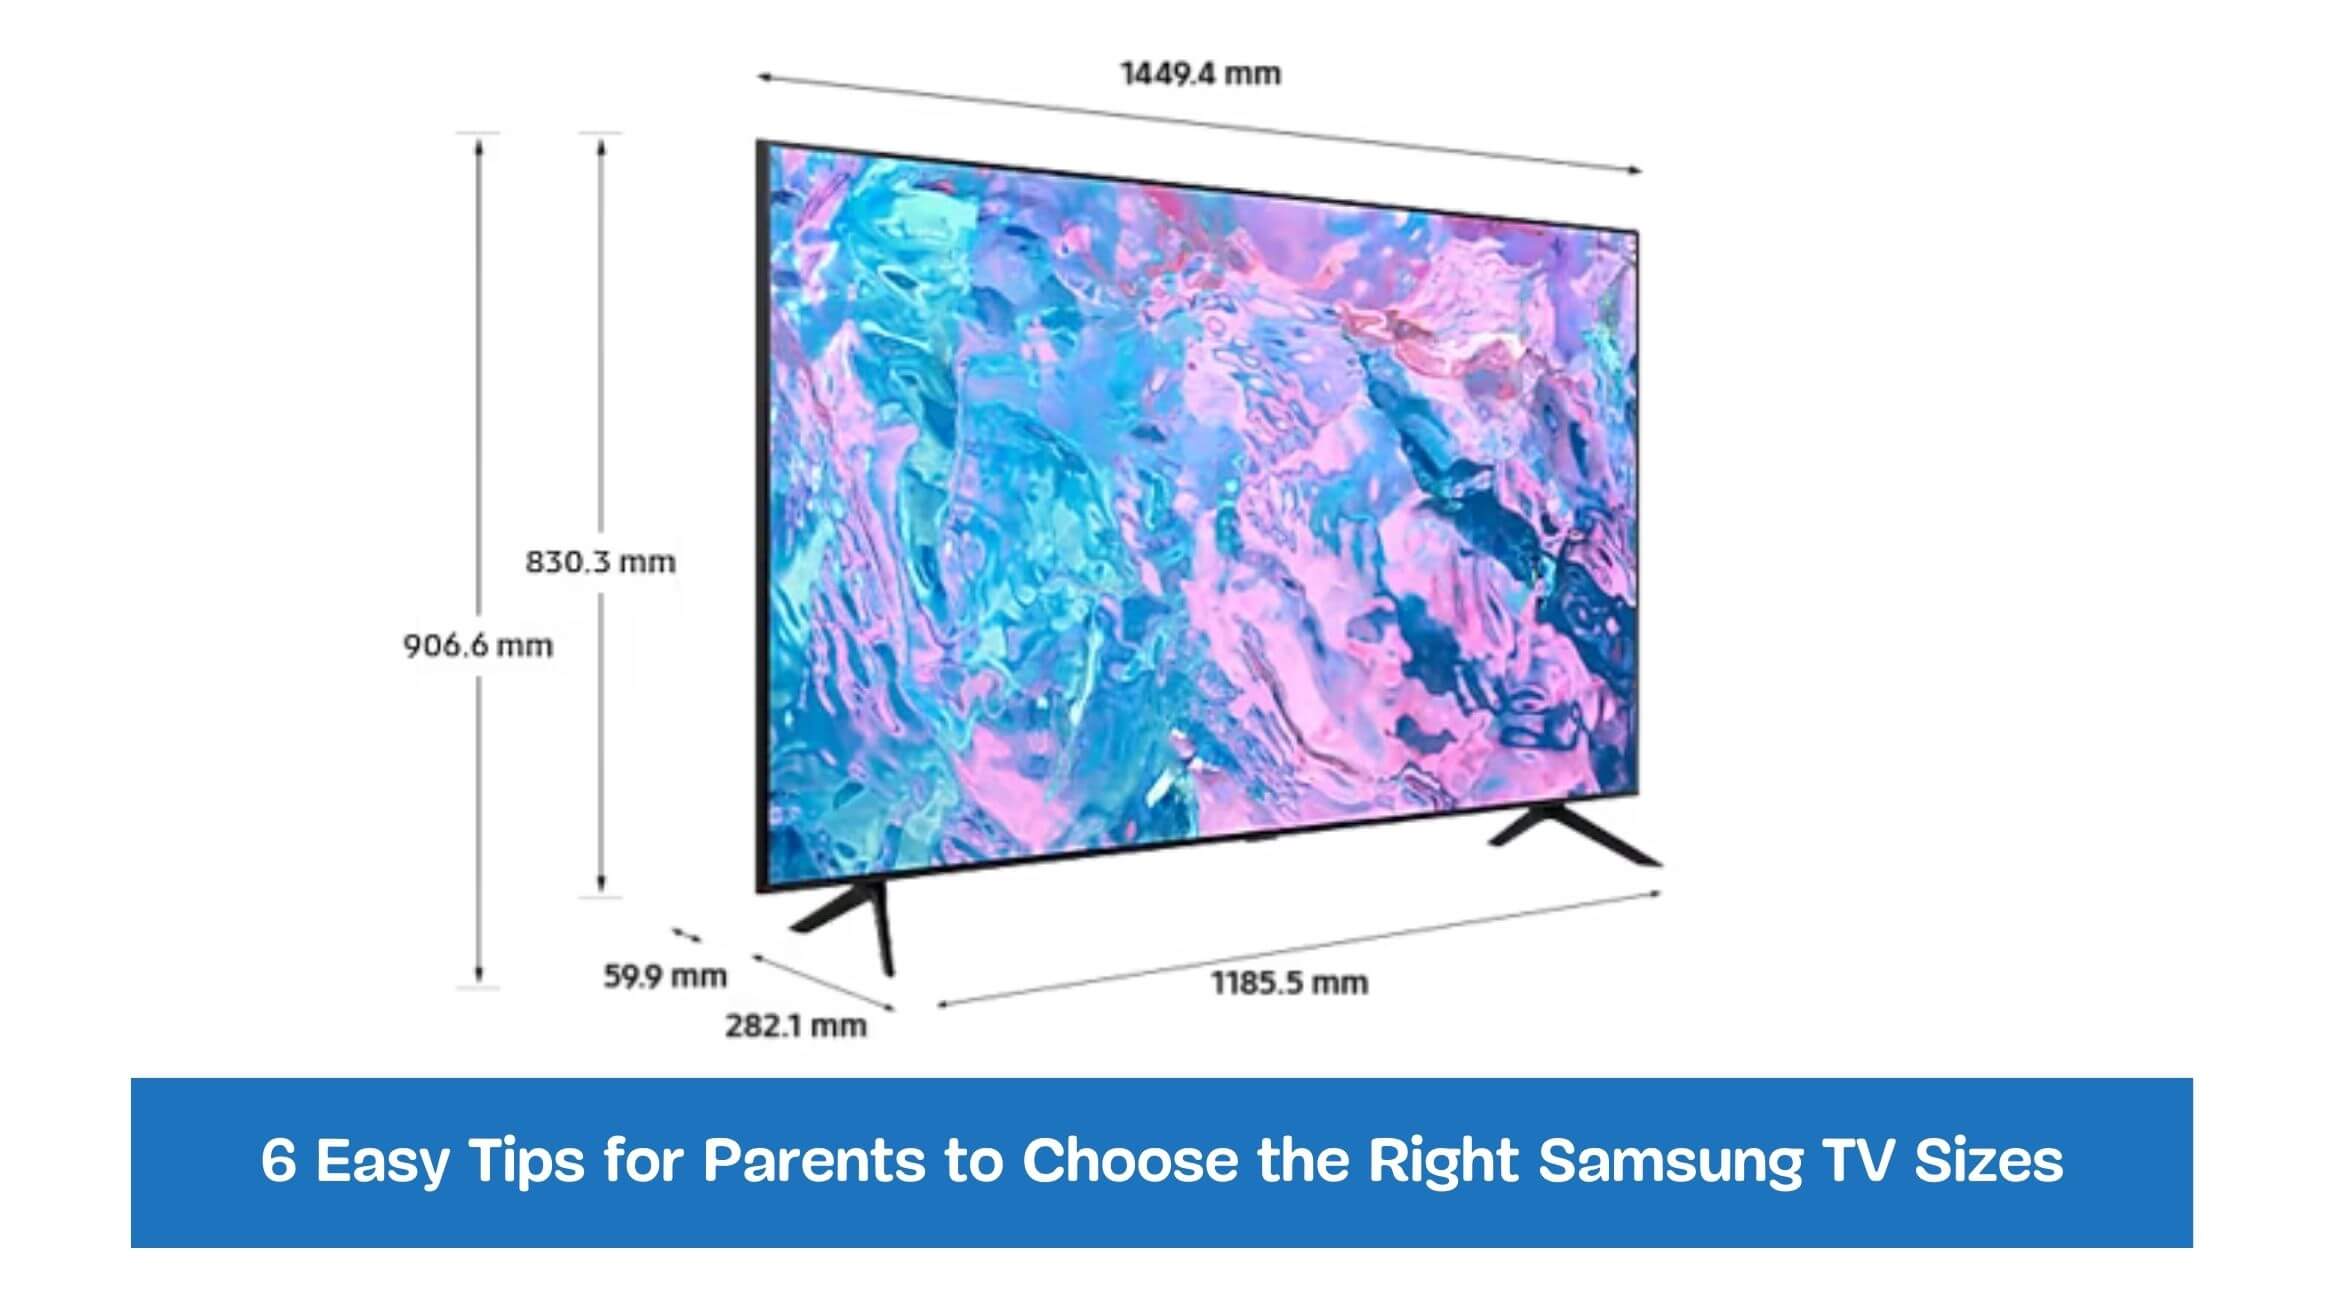 6 Easy Tips for Parents to Choose the Right Samsung TV Sizes